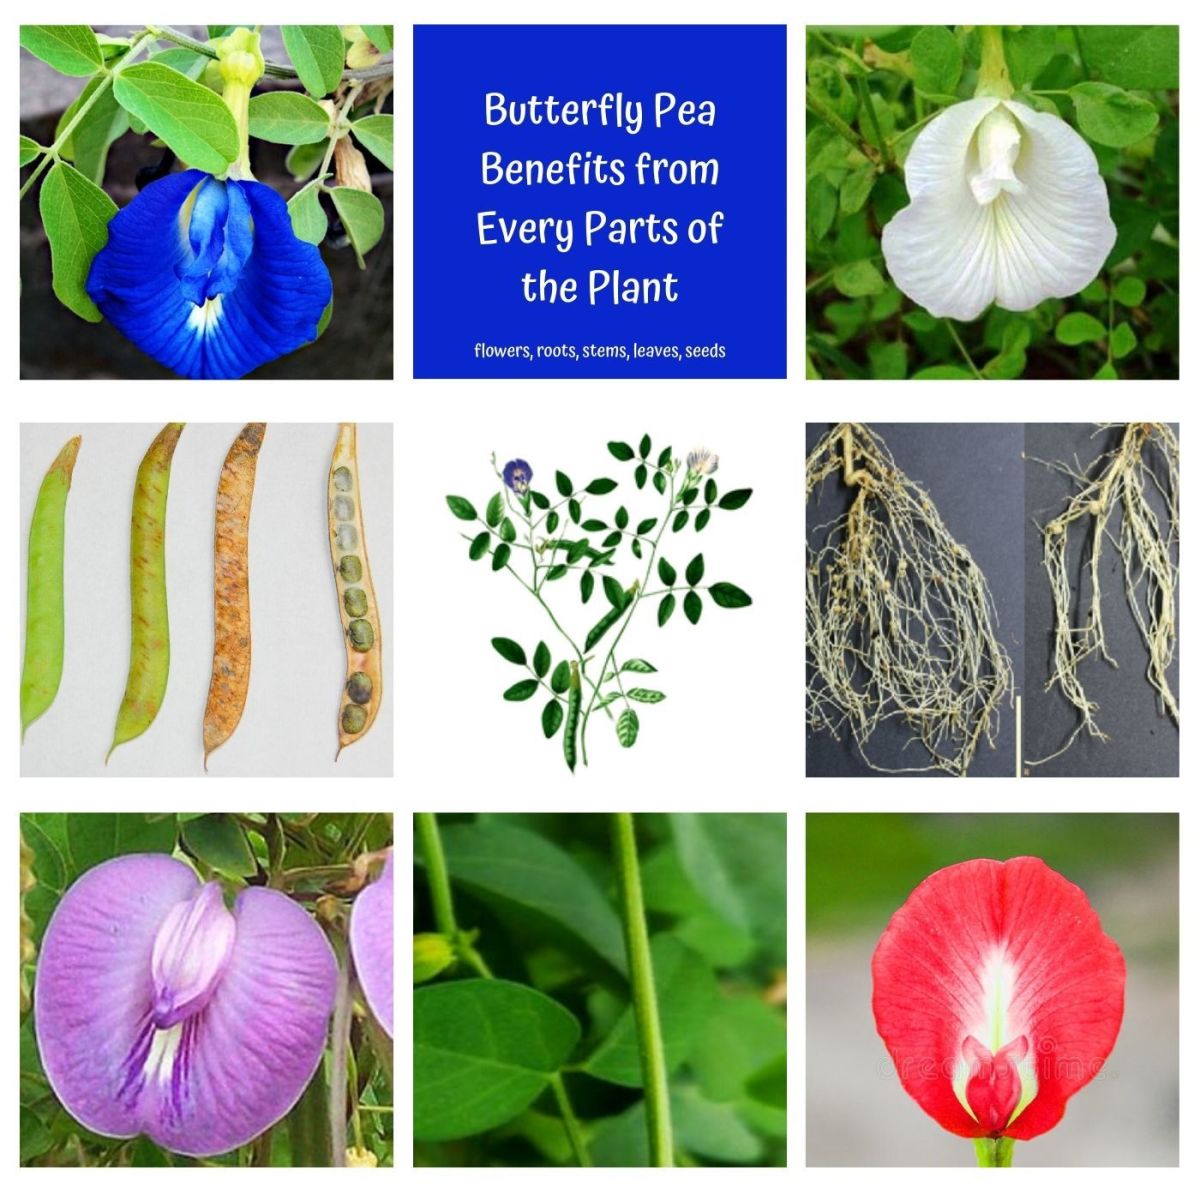 Find out which part of the butterfly pea plant has the most or none of the phytochemicals, and which part gives most of the benefits.